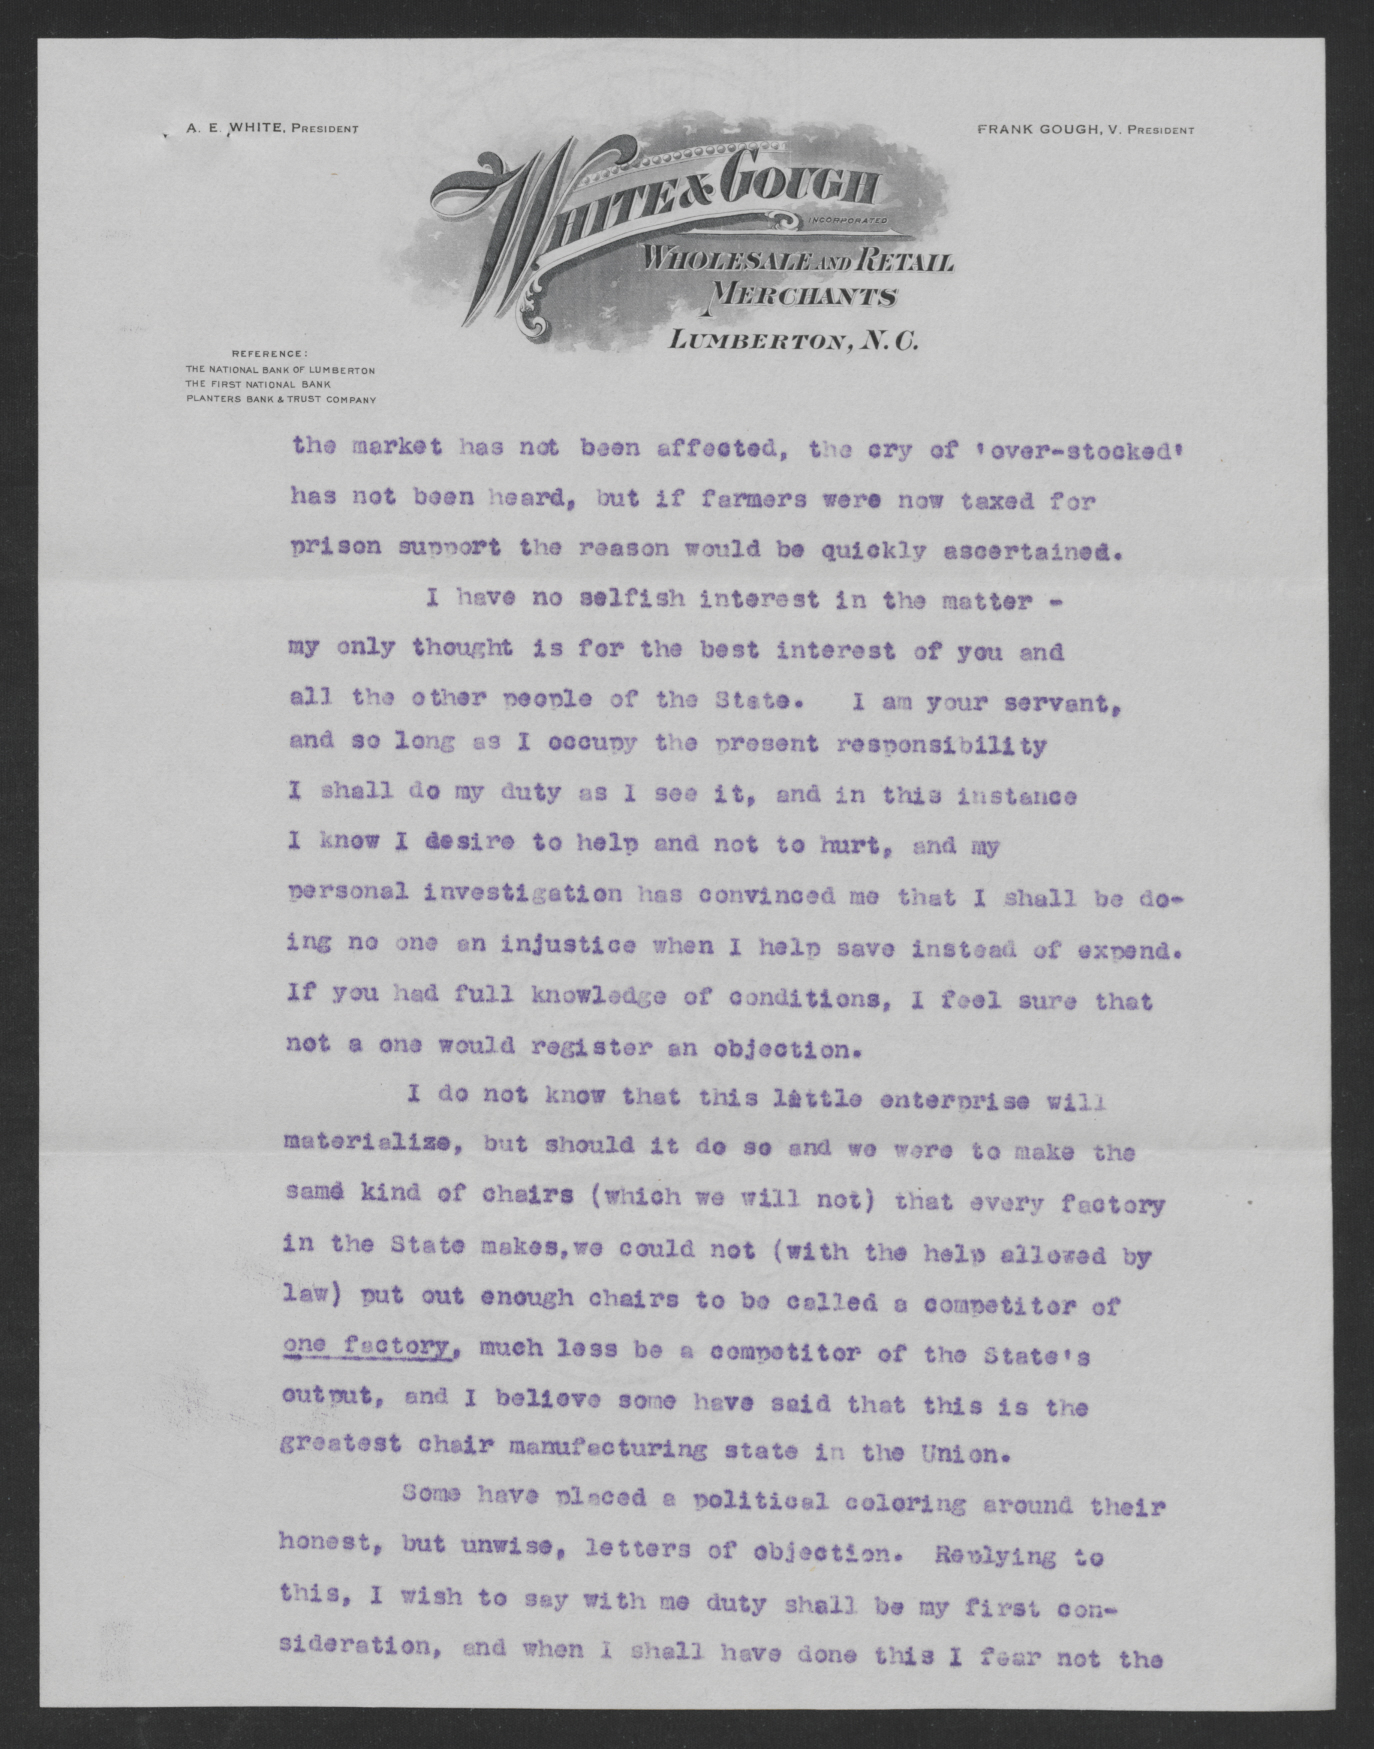 Gough to Representatives of the Furniture Industry, February 19, 1920, page 3